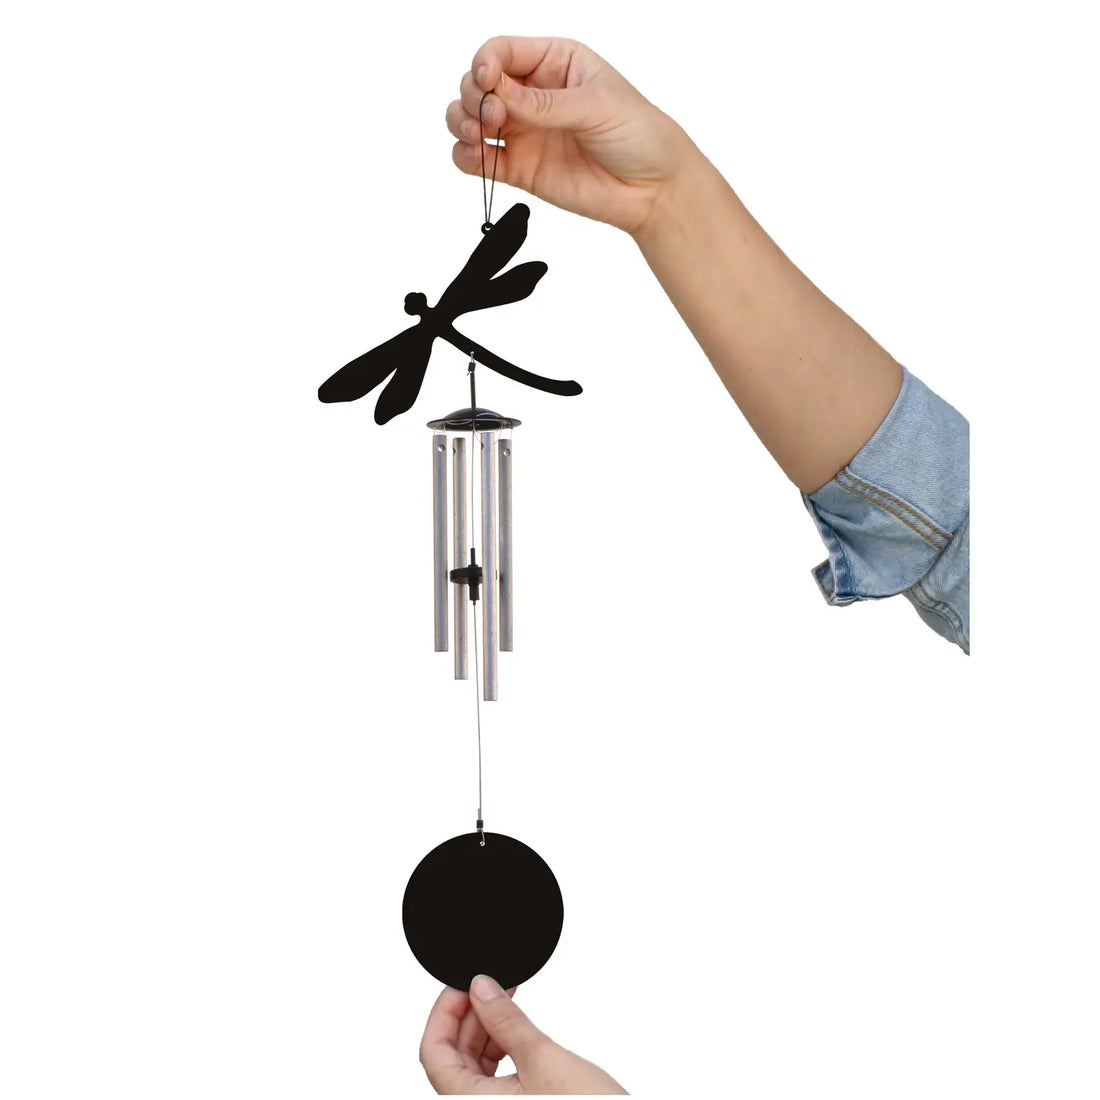 Jacob's Silhouette Wind Chime, Dragonfly